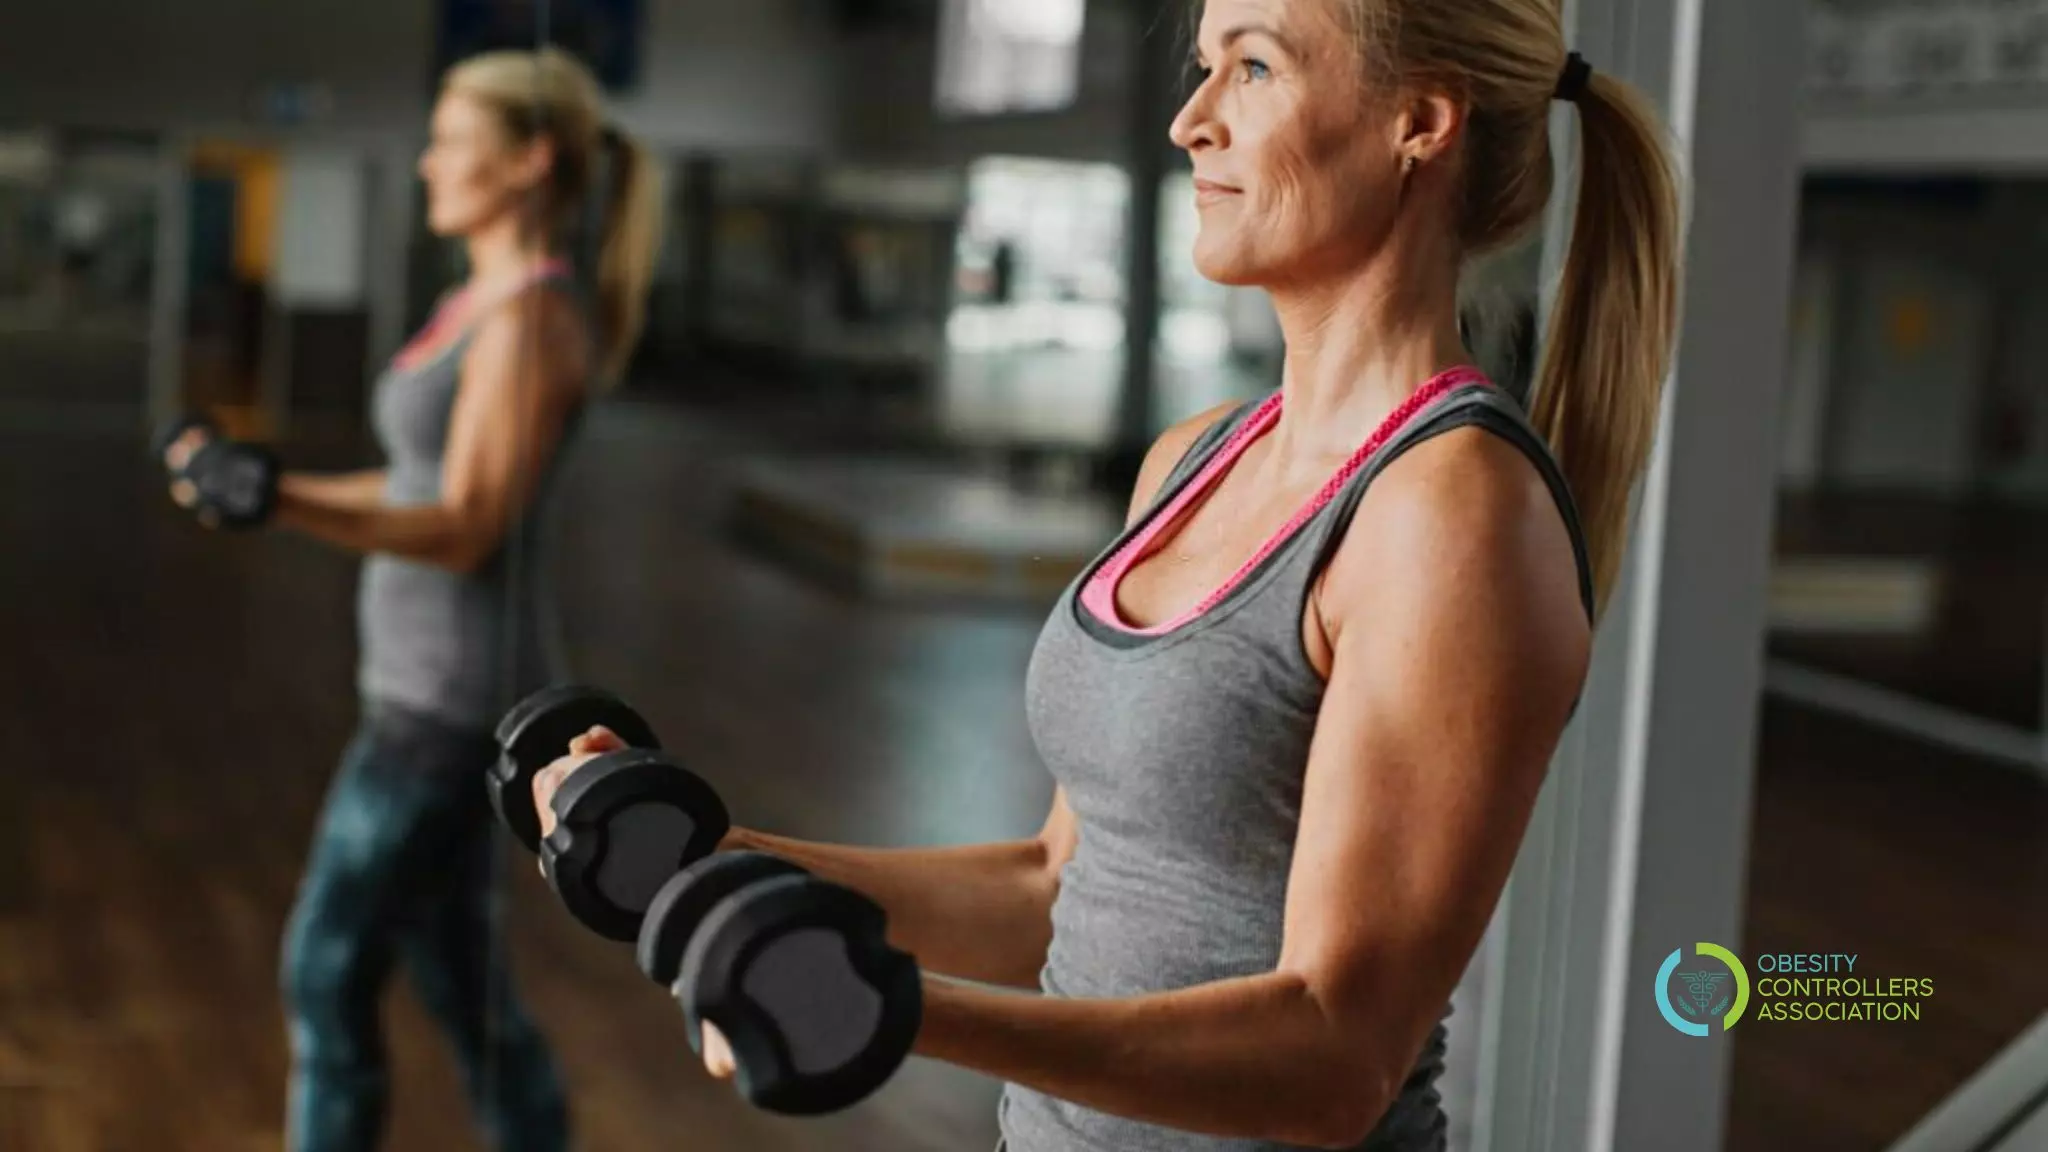 Benefits Of Strength Training For Women